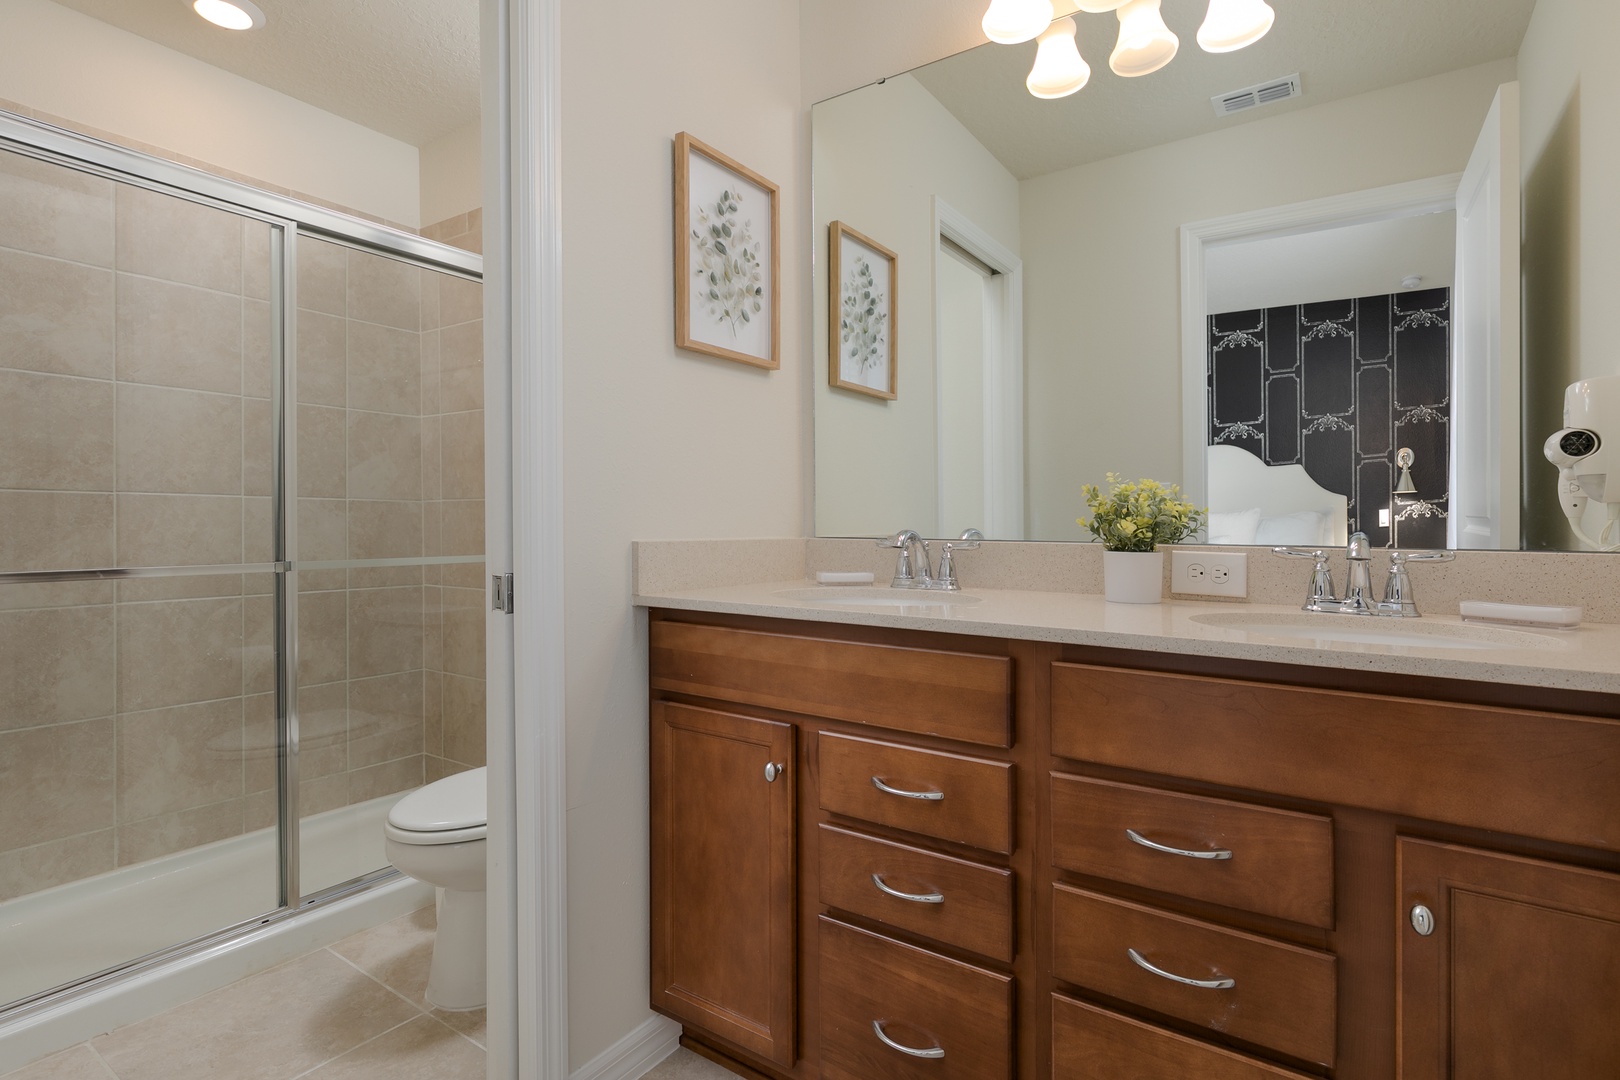 This private en suite includes a double vanity & glass walk-in shower